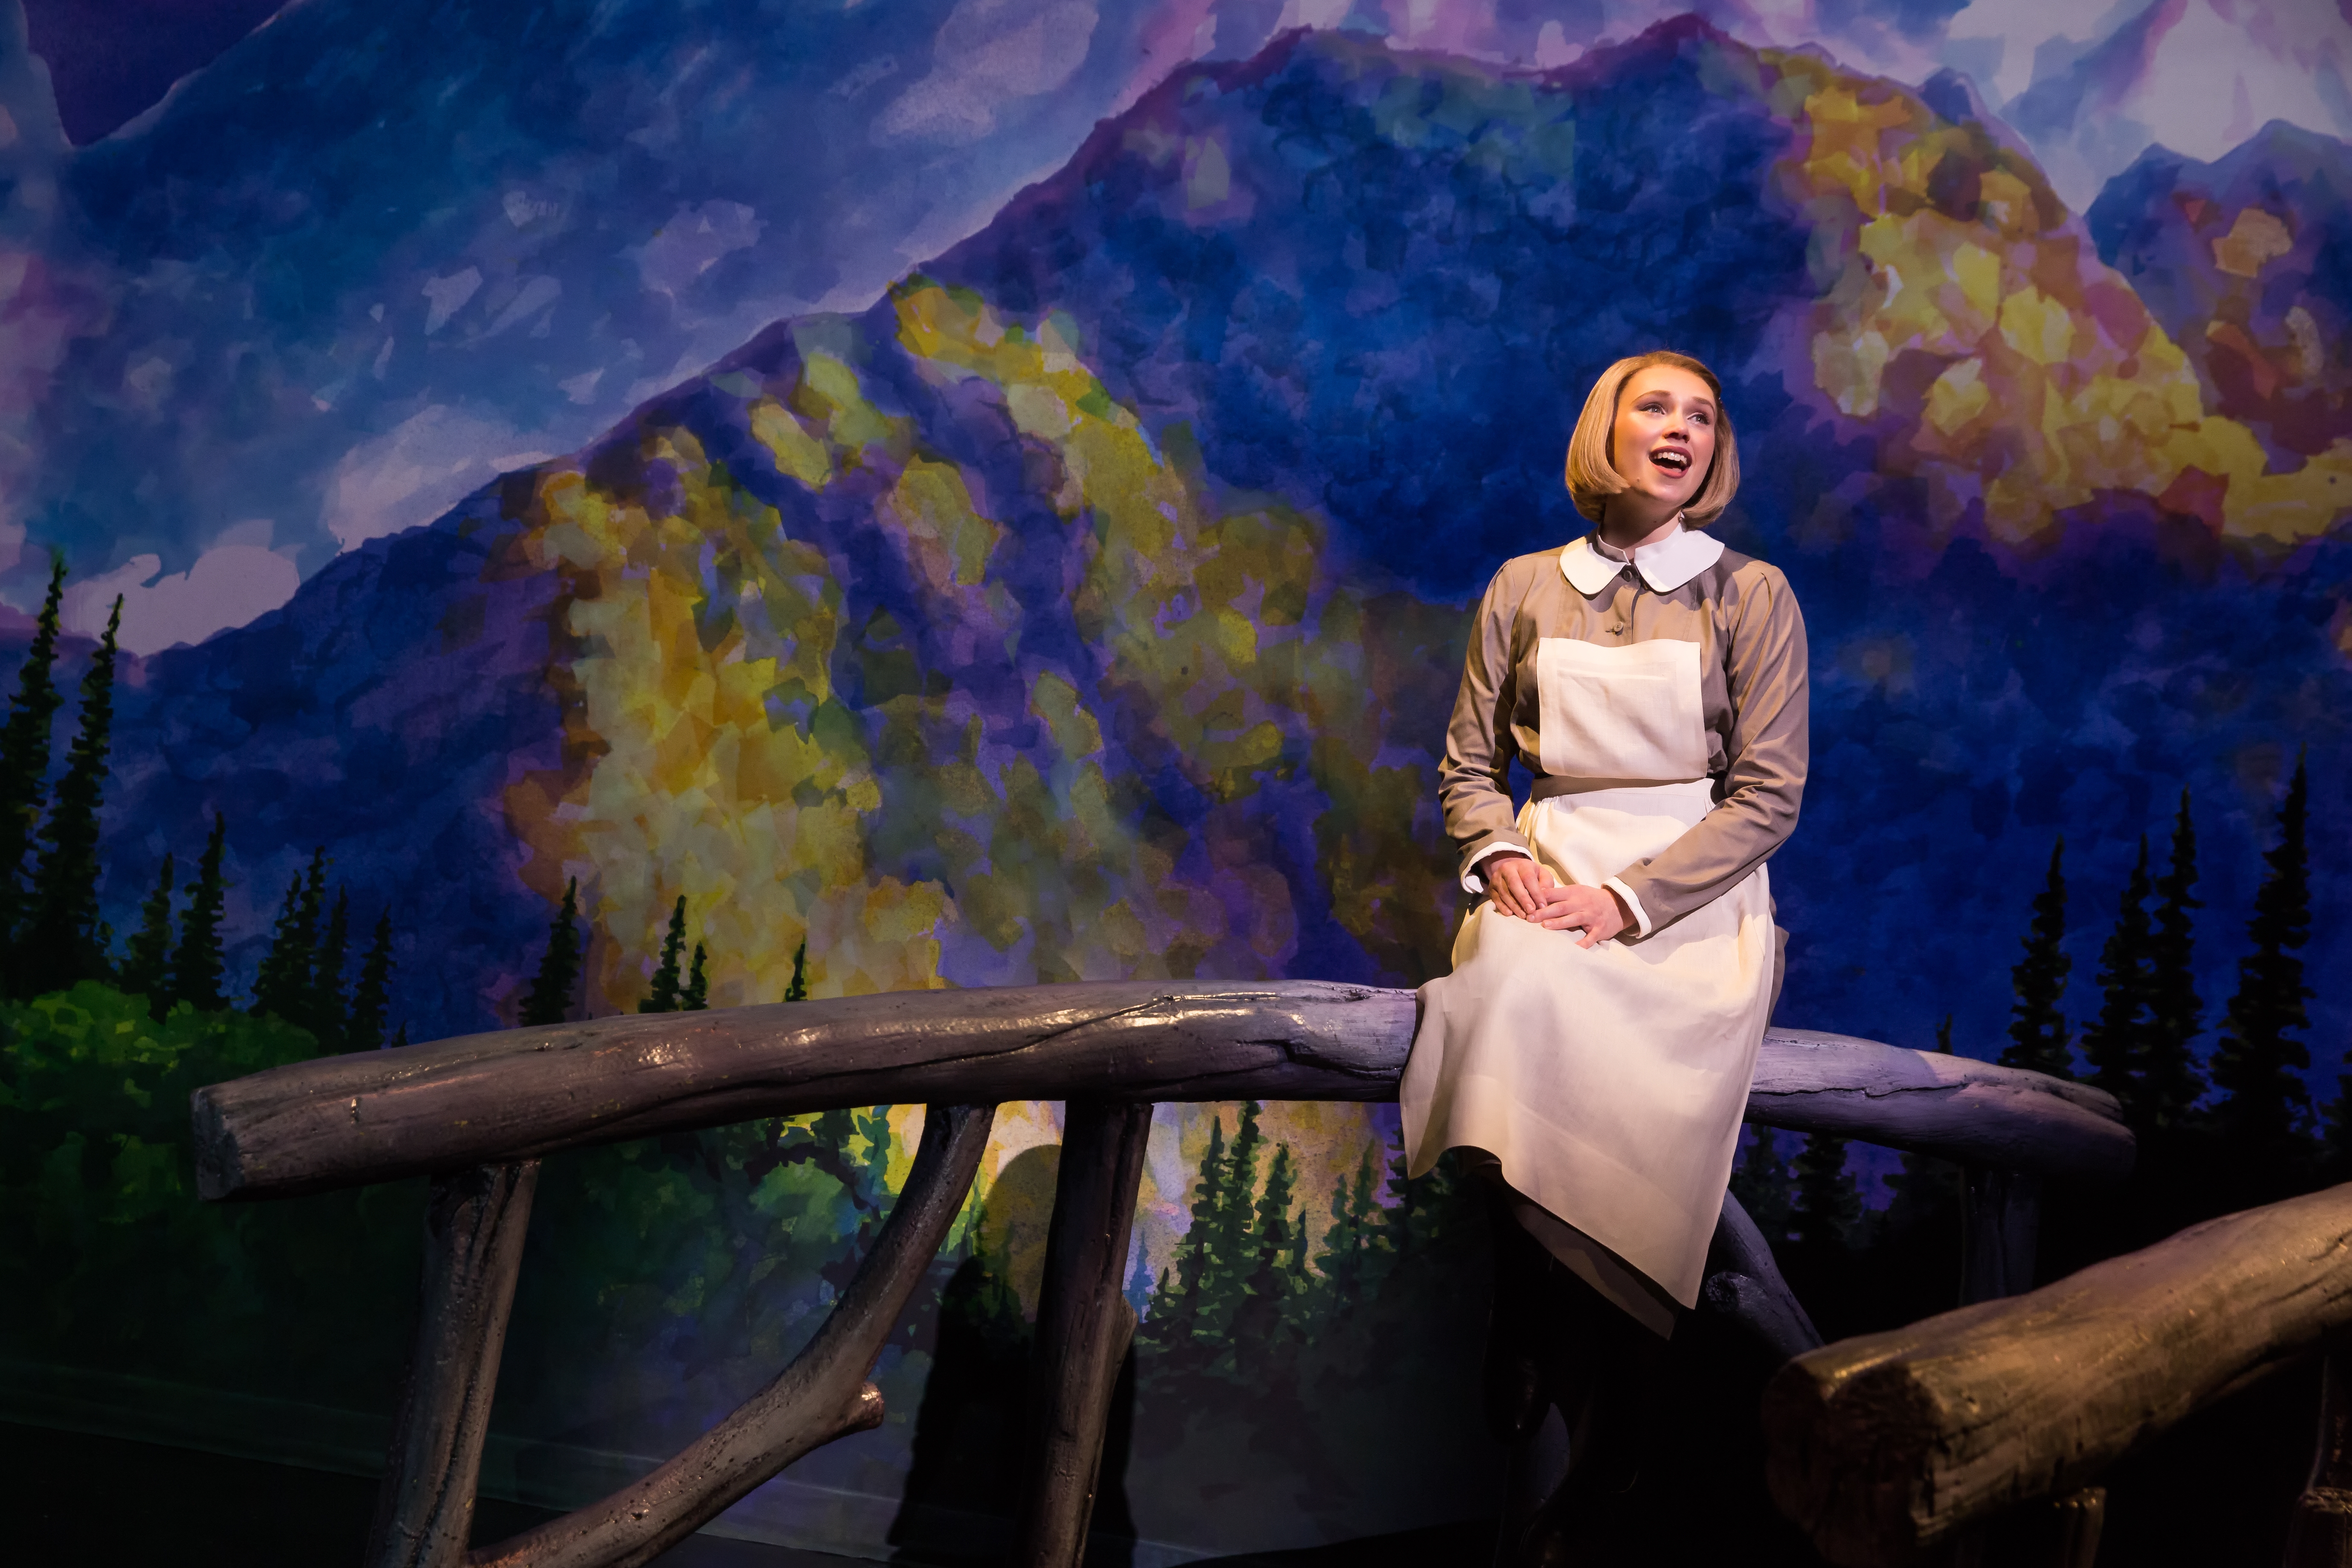 Review: "The Sound of Music" offers a solid adaptation of the famous classic